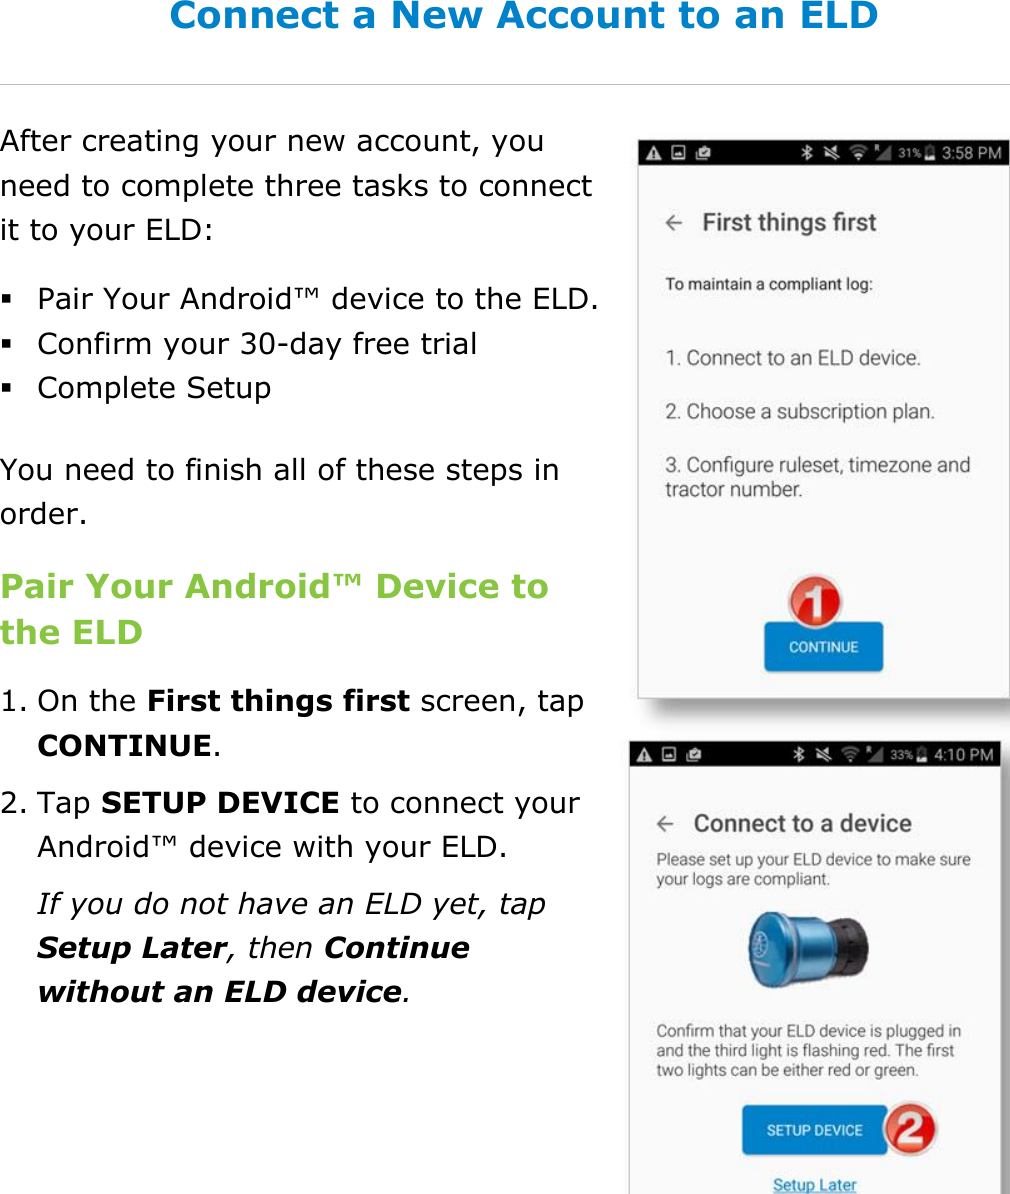 Set My Duty Status DriverConnect User Guide  12 © 2017, Rand McNally, Inc. Connect a New Account to an ELD After creating your new account, you need to complete three tasks to connect it to your ELD:  Pair Your Android™ device to the ELD.  Confirm your 30-day free trial  Complete Setup You need to finish all of these steps in order. Pair Your Android™ Device to the ELD  1. On the First things first screen, tap CONTINUE. 2. Tap SETUP DEVICE to connect your Android™ device with your ELD. If you do not have an ELD yet, tap Setup Later, then Continue without an ELD device.   